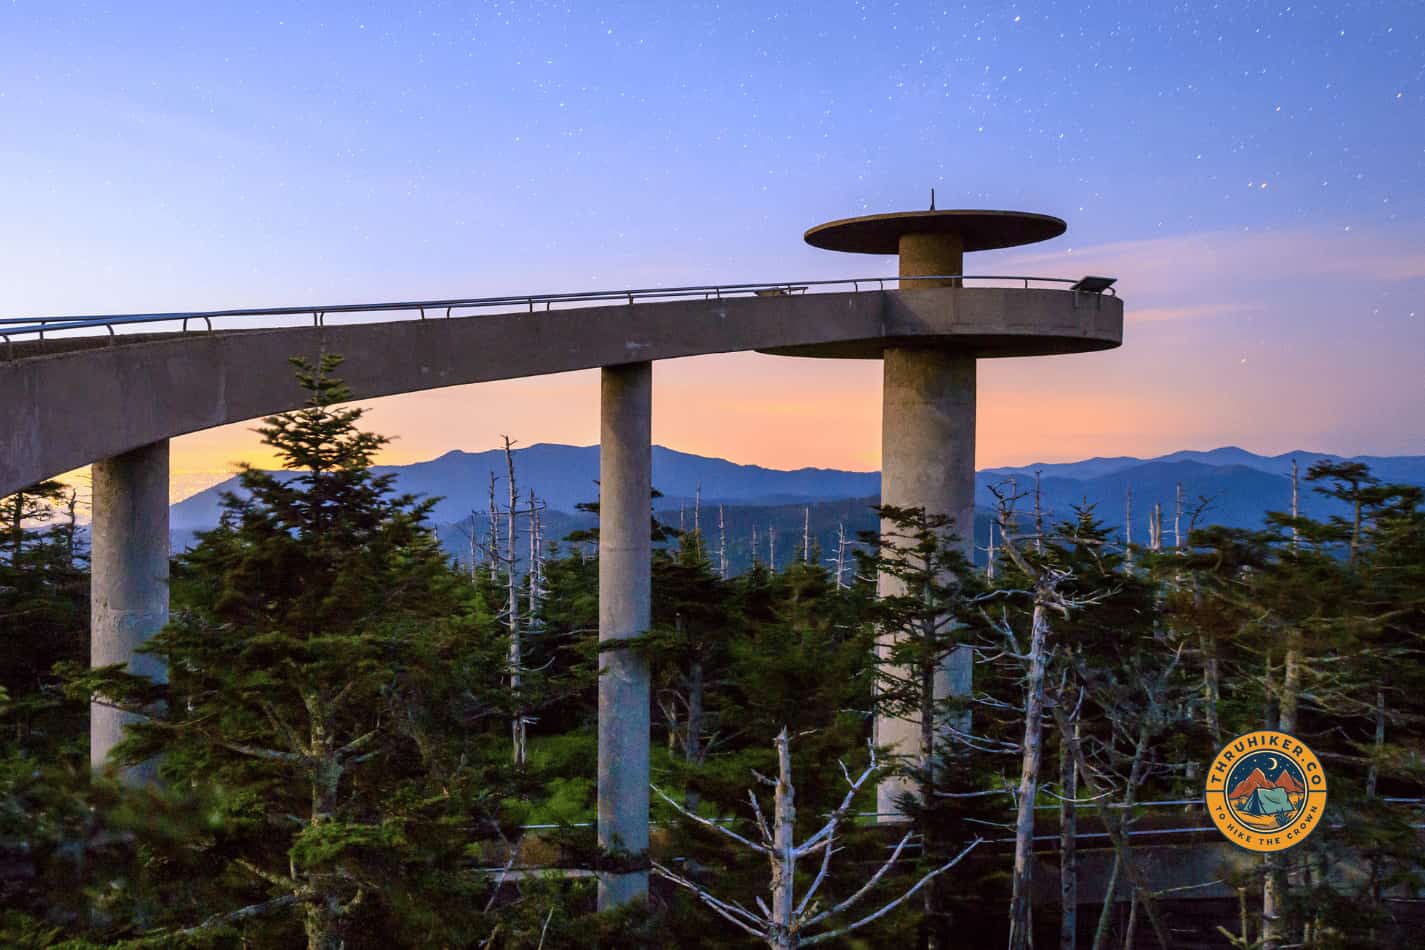 Clingmans Dome in Tennessee is a major point in your early adventure